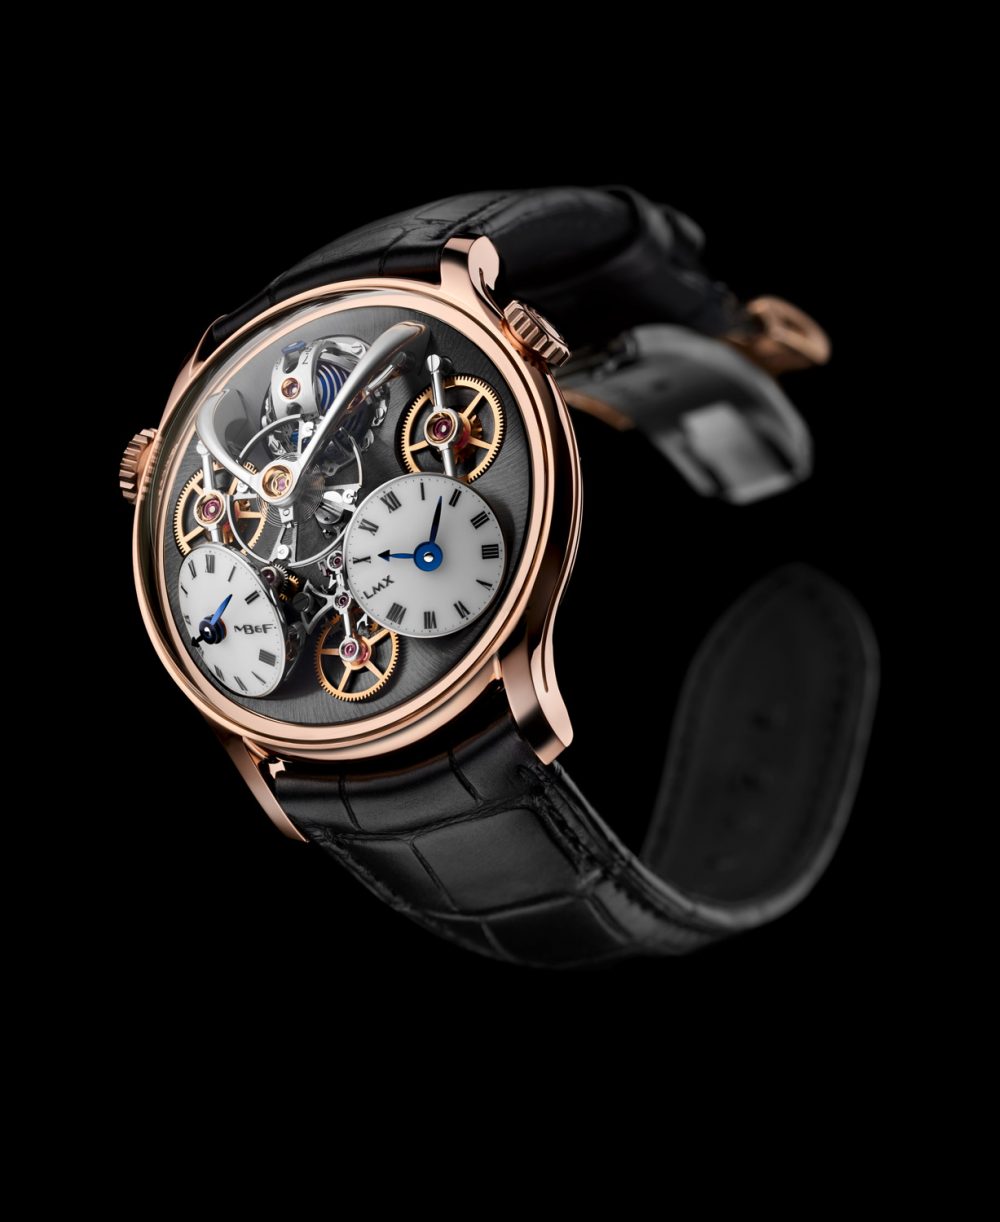 MB&F celebrates 10 Years of its Legacy Machines With LMX model